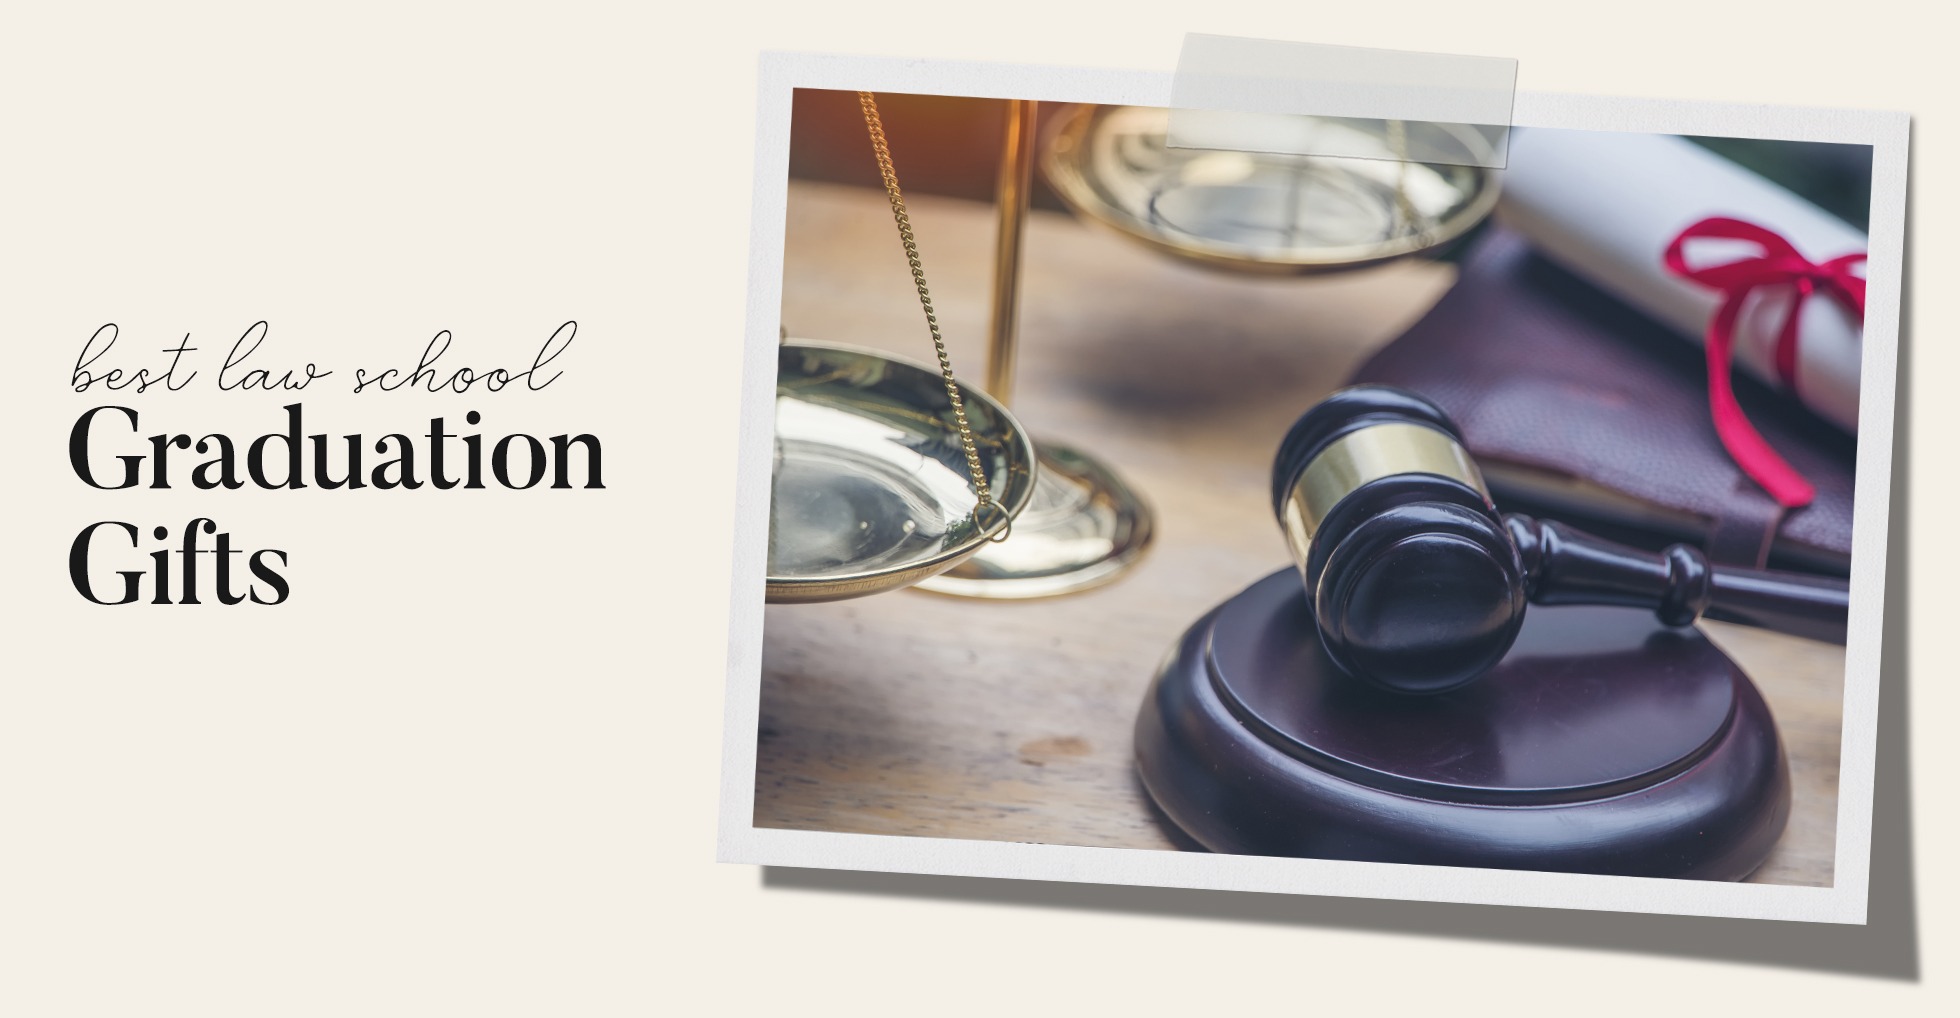 7 Professional Law School Graduation Gift Ideas to Say Well Done